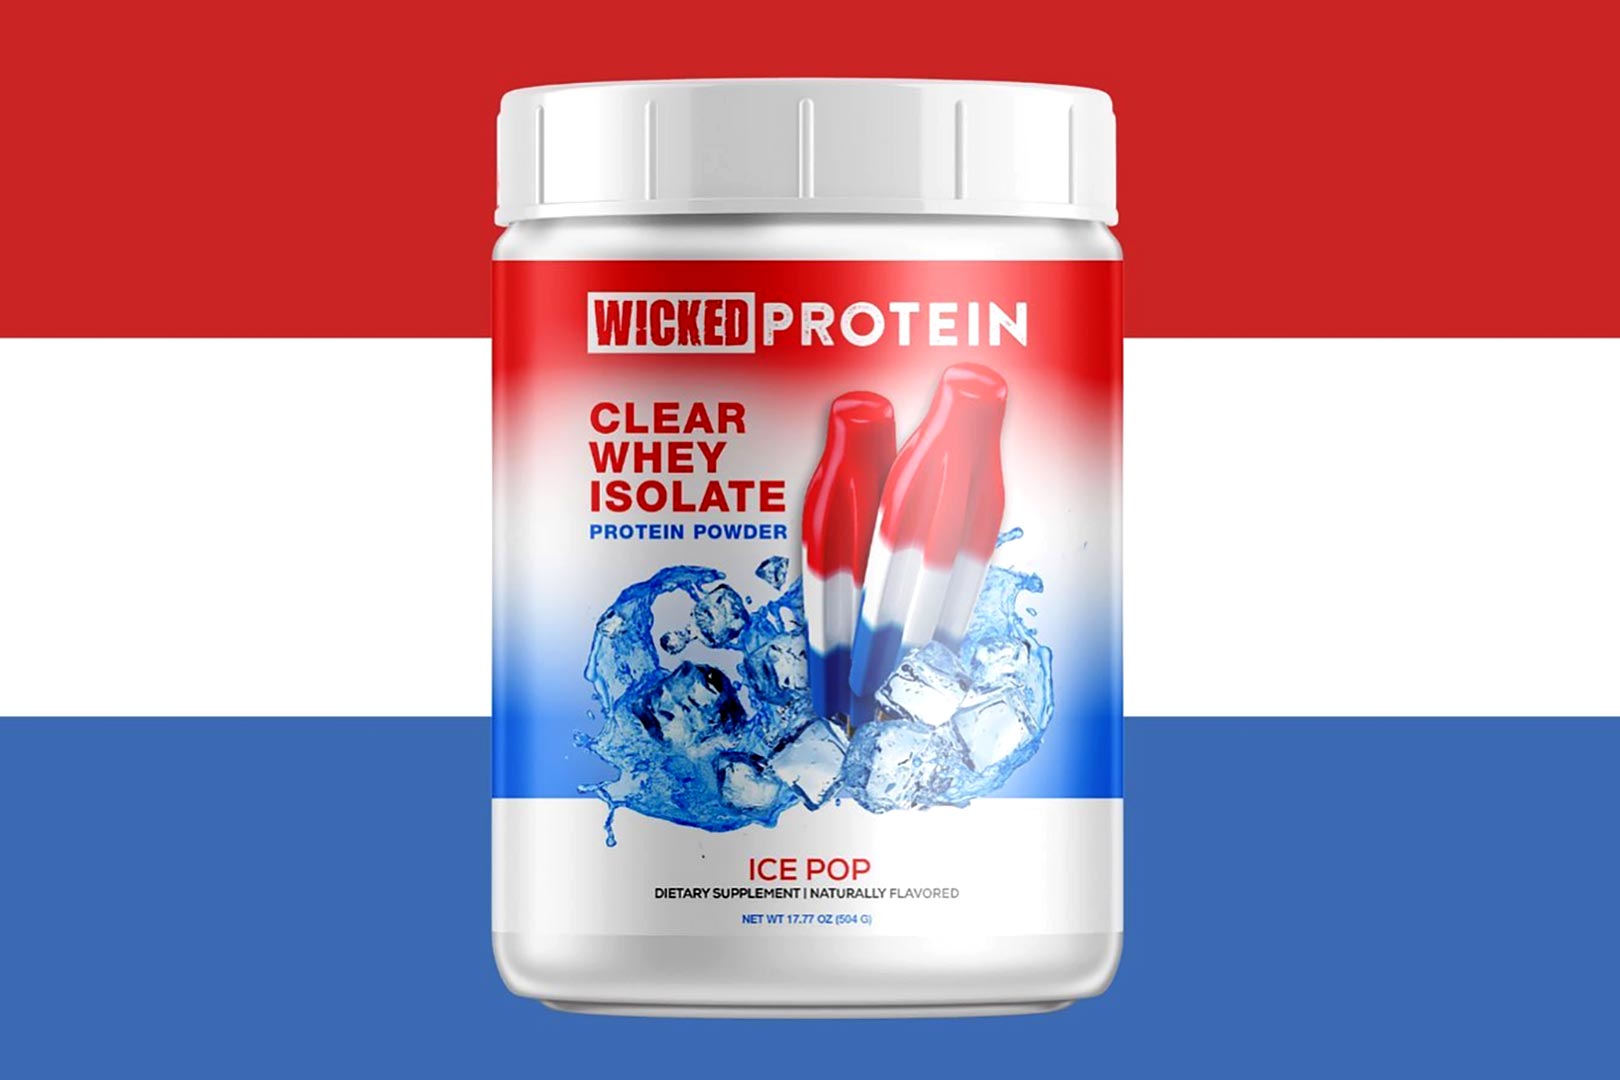 Wicked Protein drops its Ice Pop Clear Whey Isolate for 4th Of July